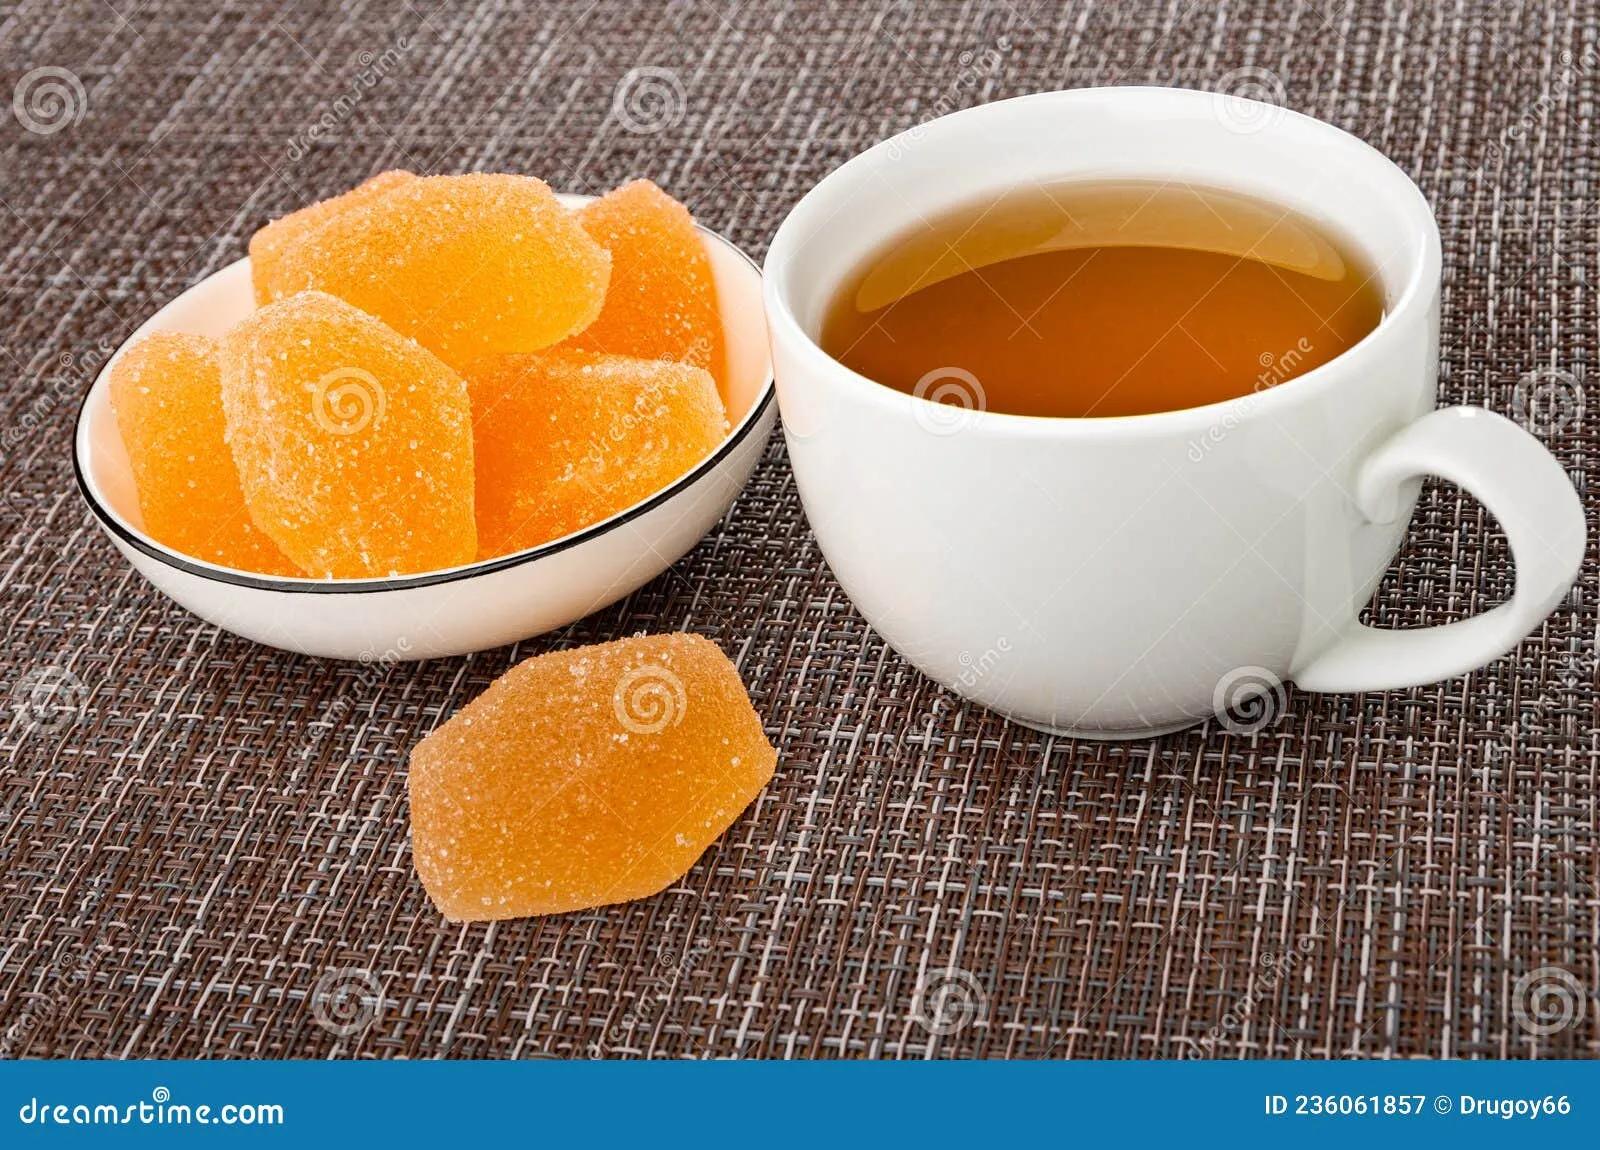 Orange Color Marmalades in White Bowl, Marmalade, Cup with Tea on Mat ...